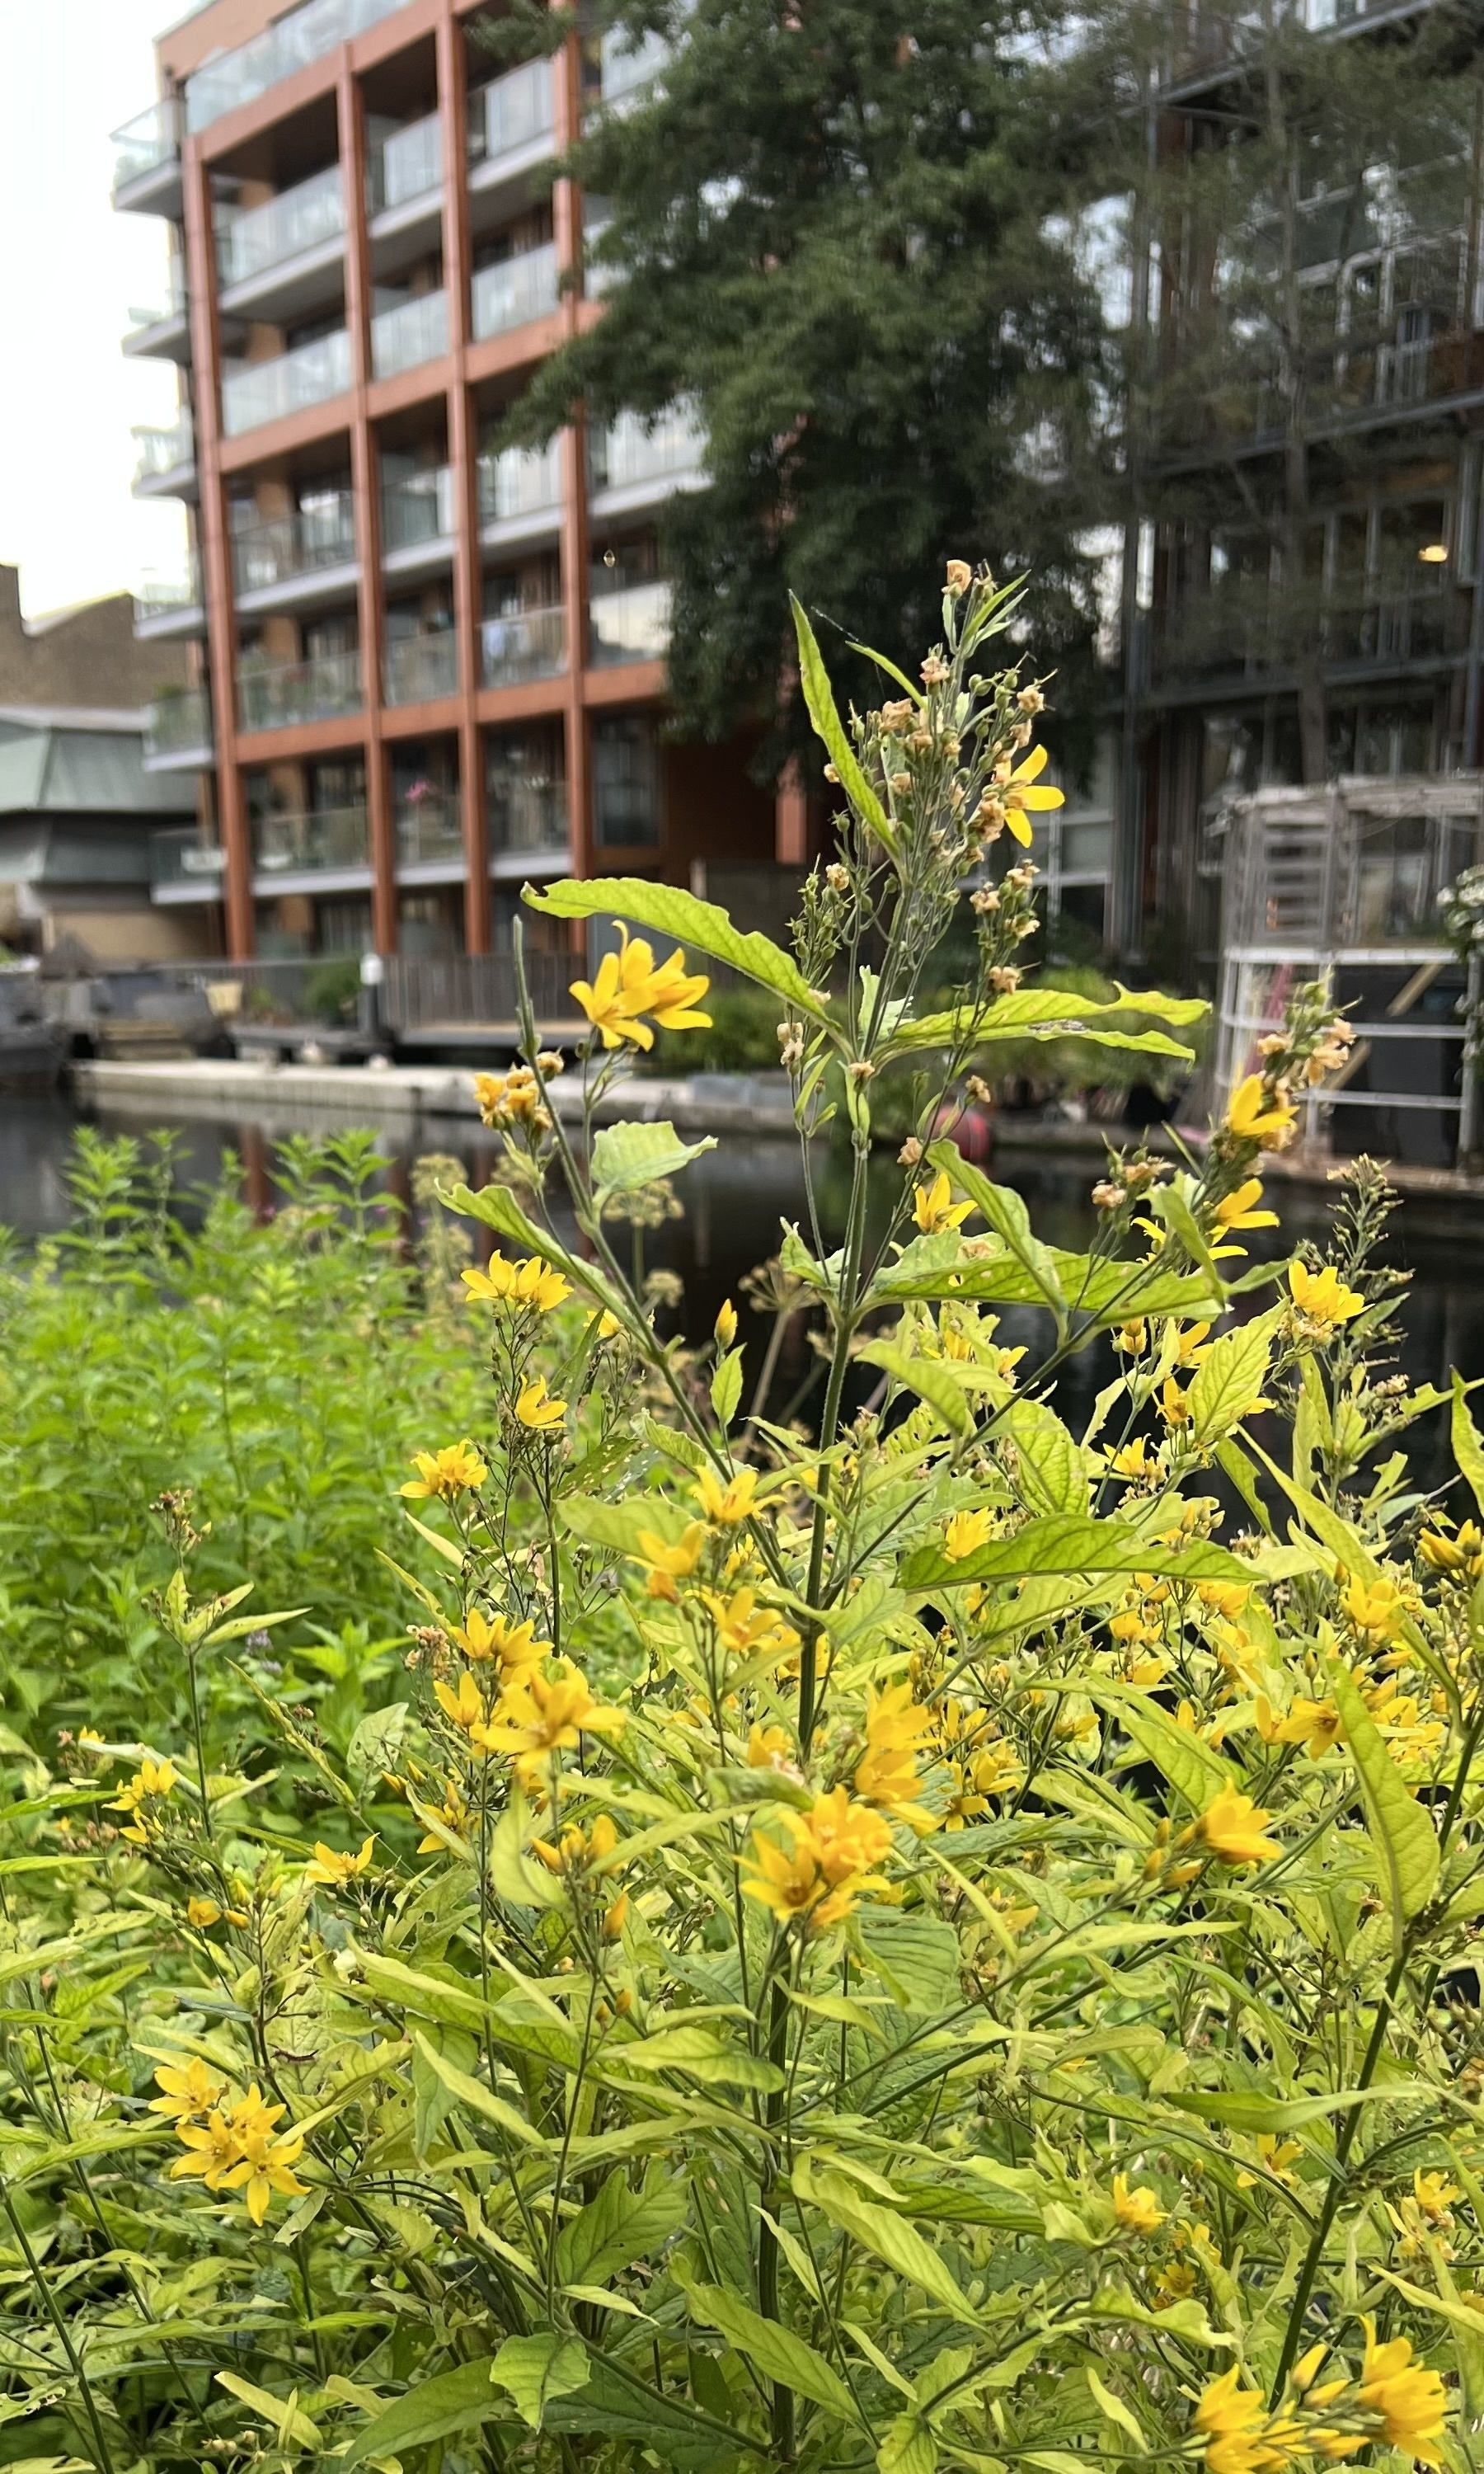 A close up of small yellow flowers, with a canal and apartment blocks in the background.